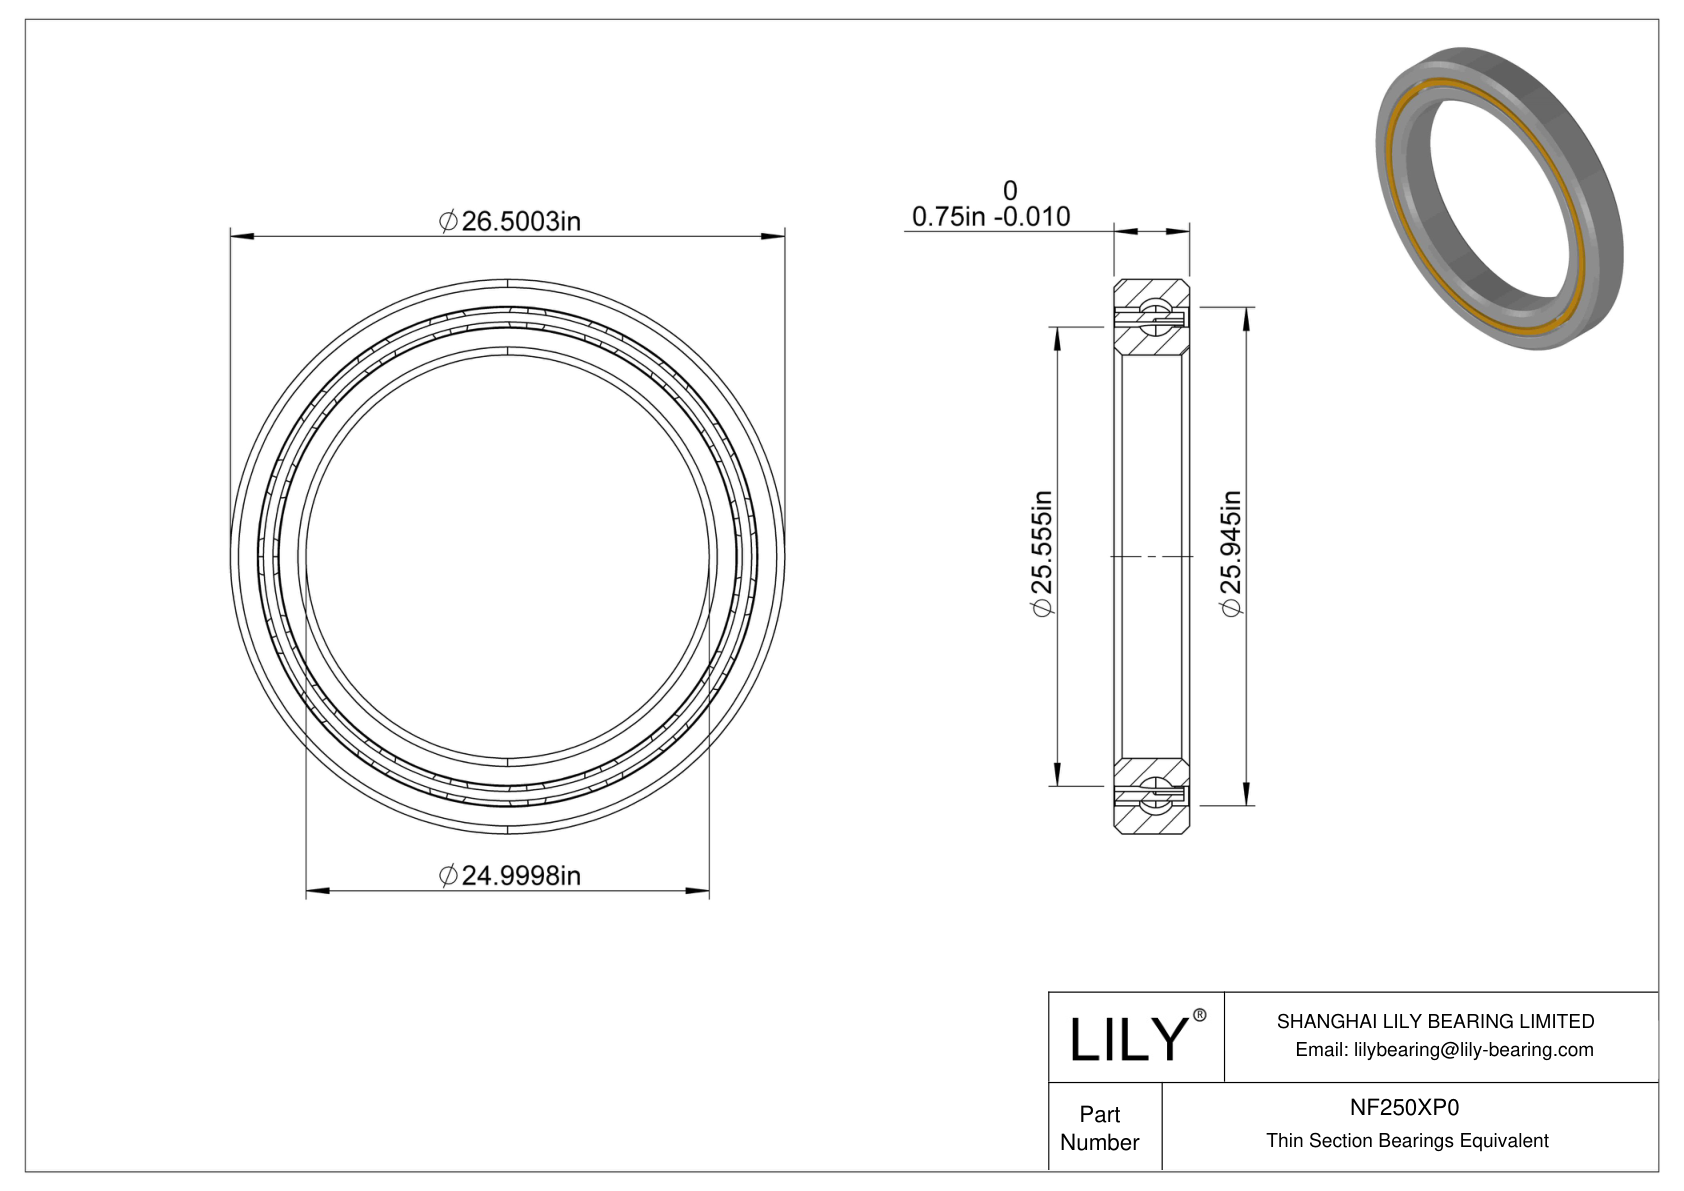 NF250XP0 Constant Section (CS) Bearings cad drawing